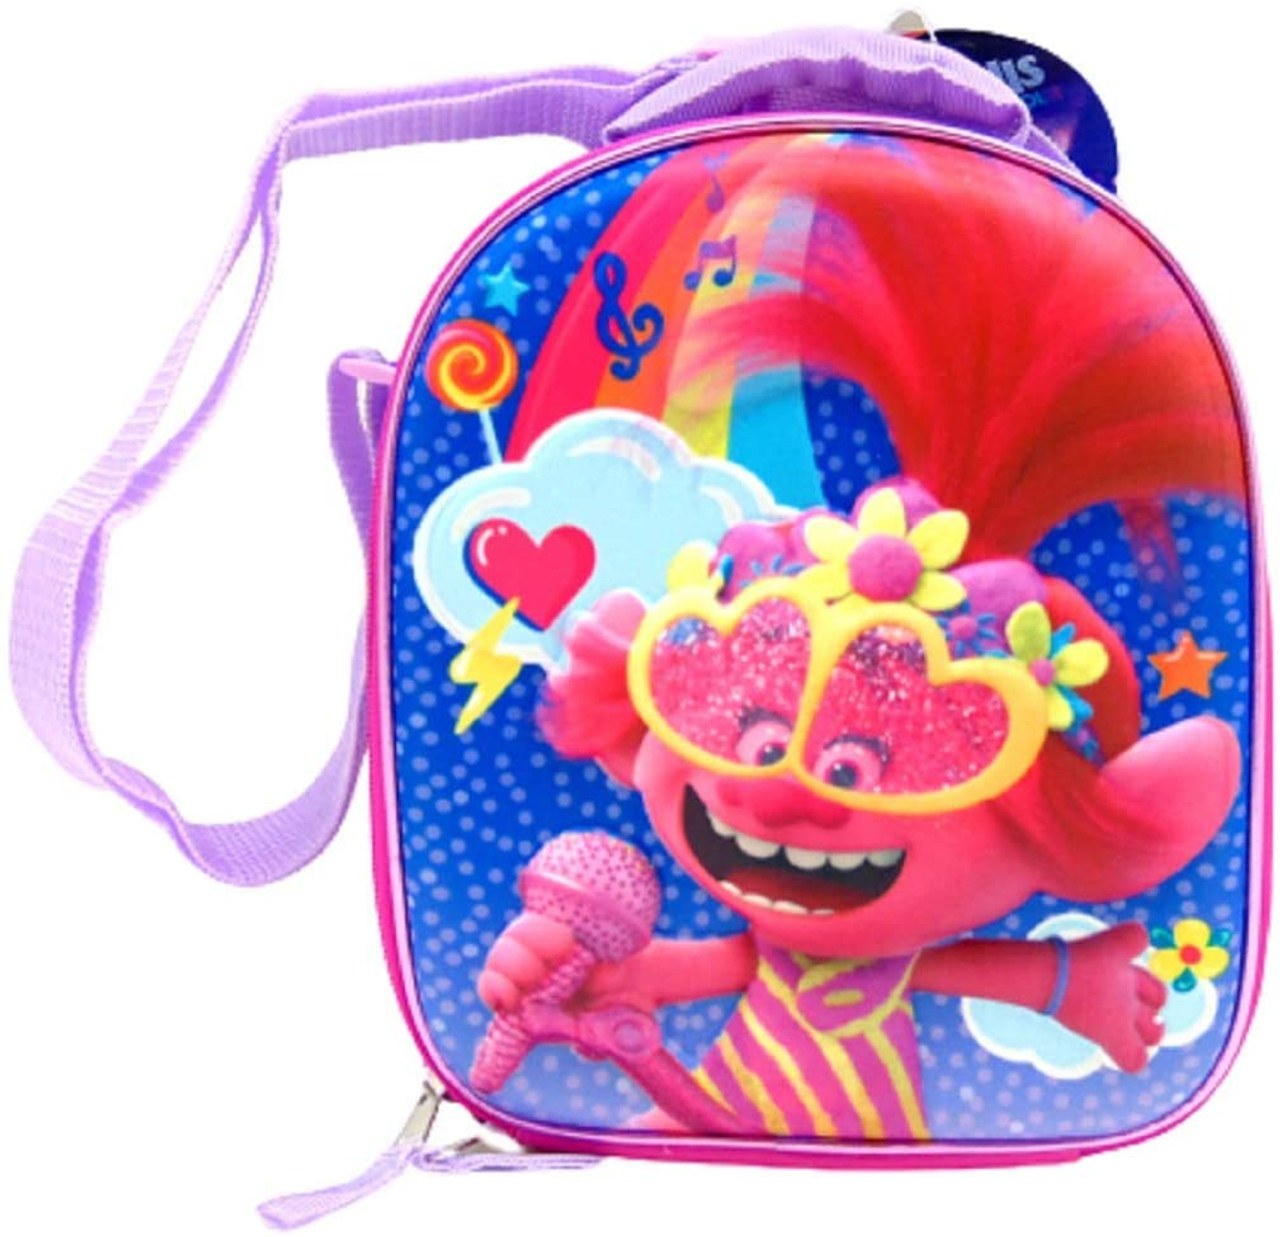  Trolls World Tour Dreamworks Trolls Lunch Box Bundle ~ Trolls  Lunch Bag For Girls  Trolls School Supplies With Trolls Stickers And More!  (Trolls Lunch Containers) : Home & Kitchen